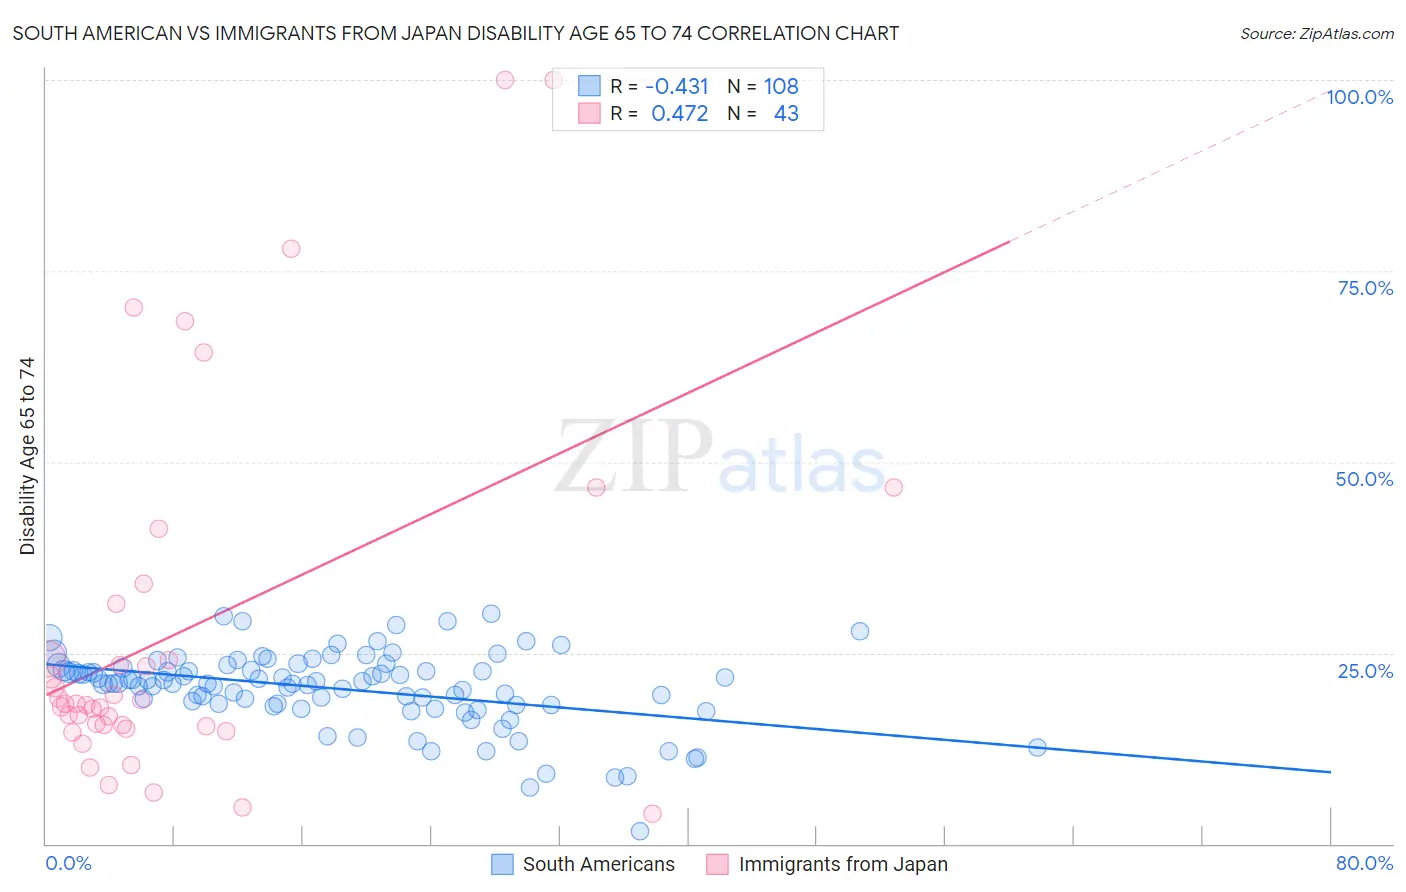 South American vs Immigrants from Japan Disability Age 65 to 74